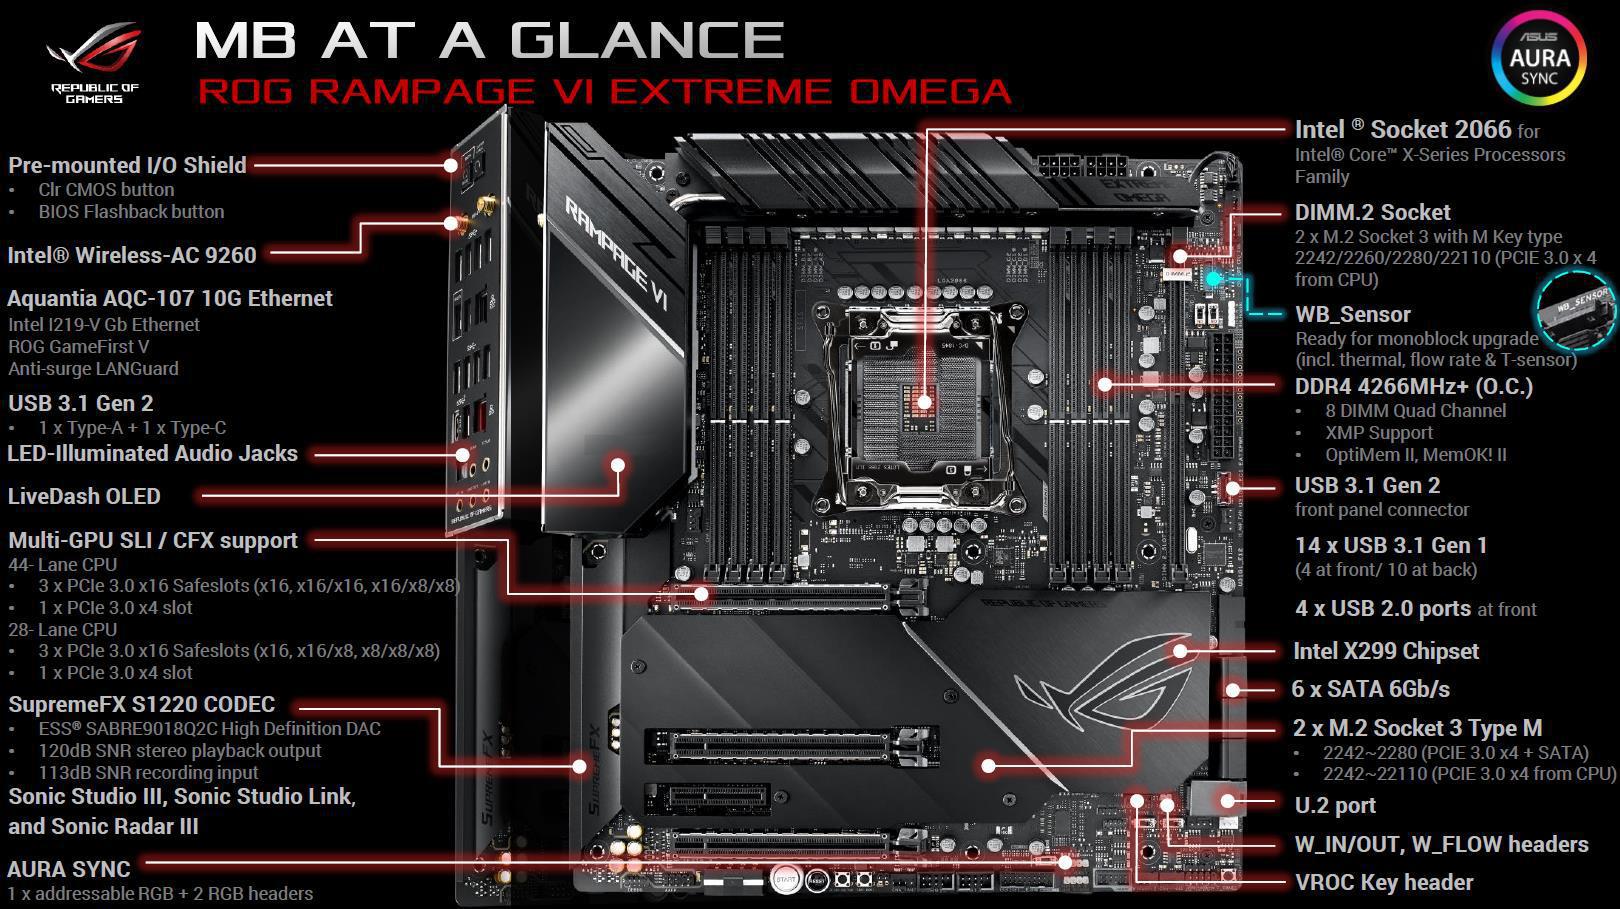 Asus Rog Rampage Vi Extreme Omega X299 Motherboard Review Page 2 Of 10 Proclockers